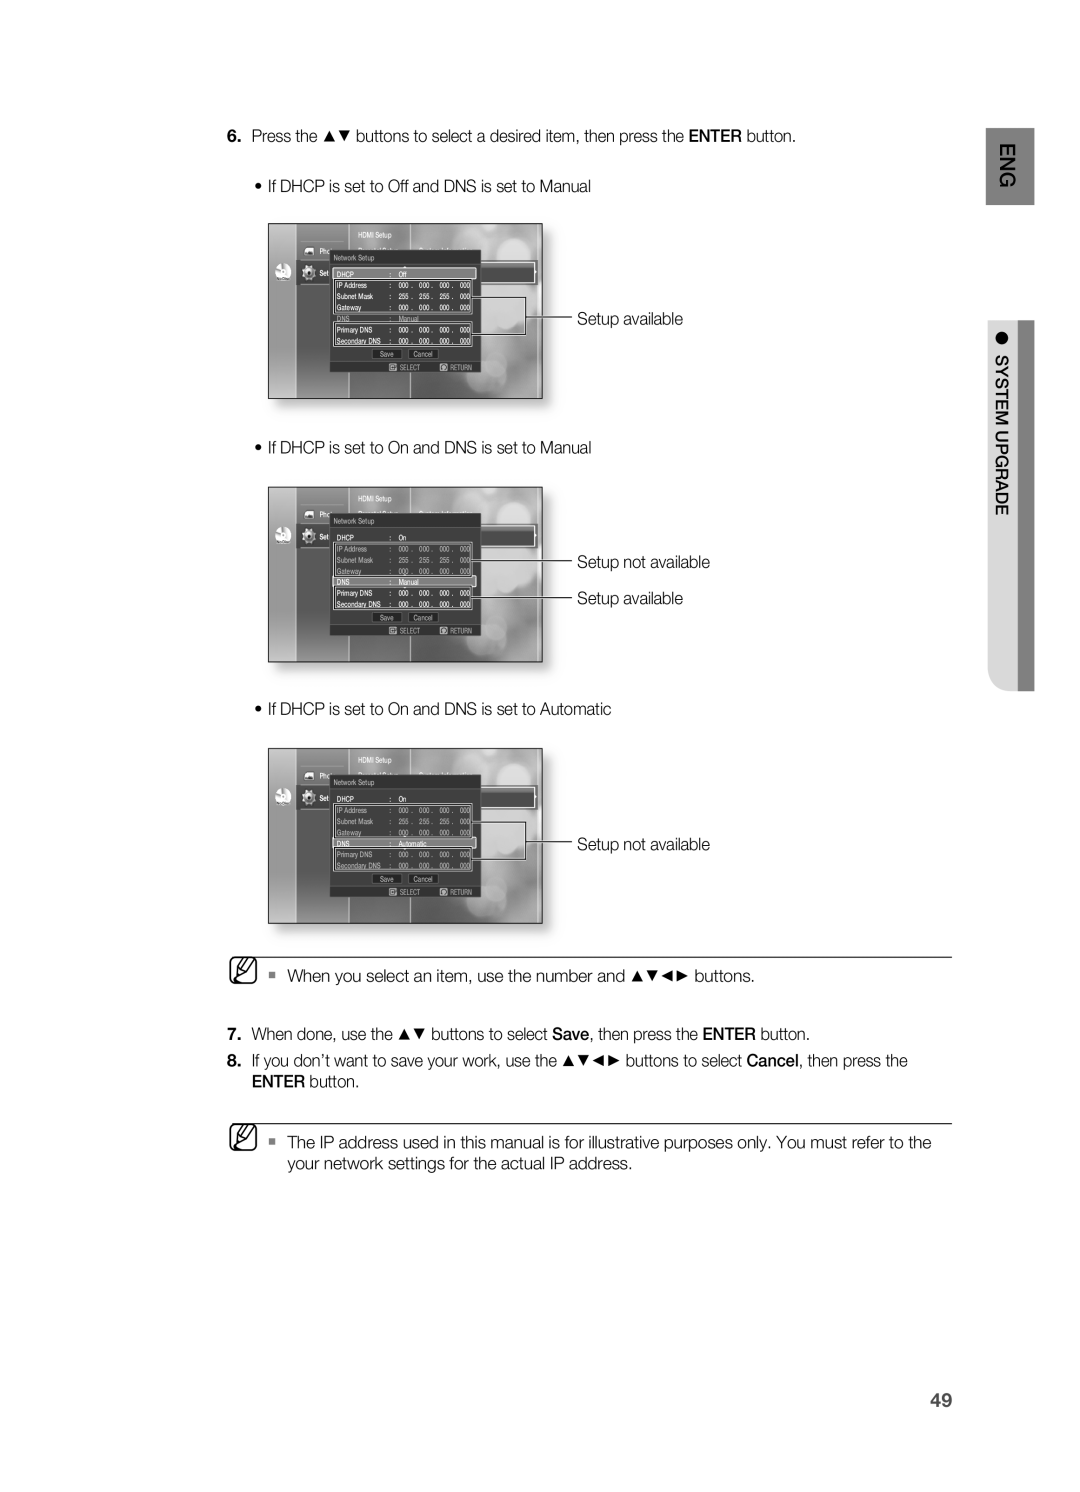 Samsung HT-BD2S manual •If DHCP is set to Off and DNS is set to Manual 